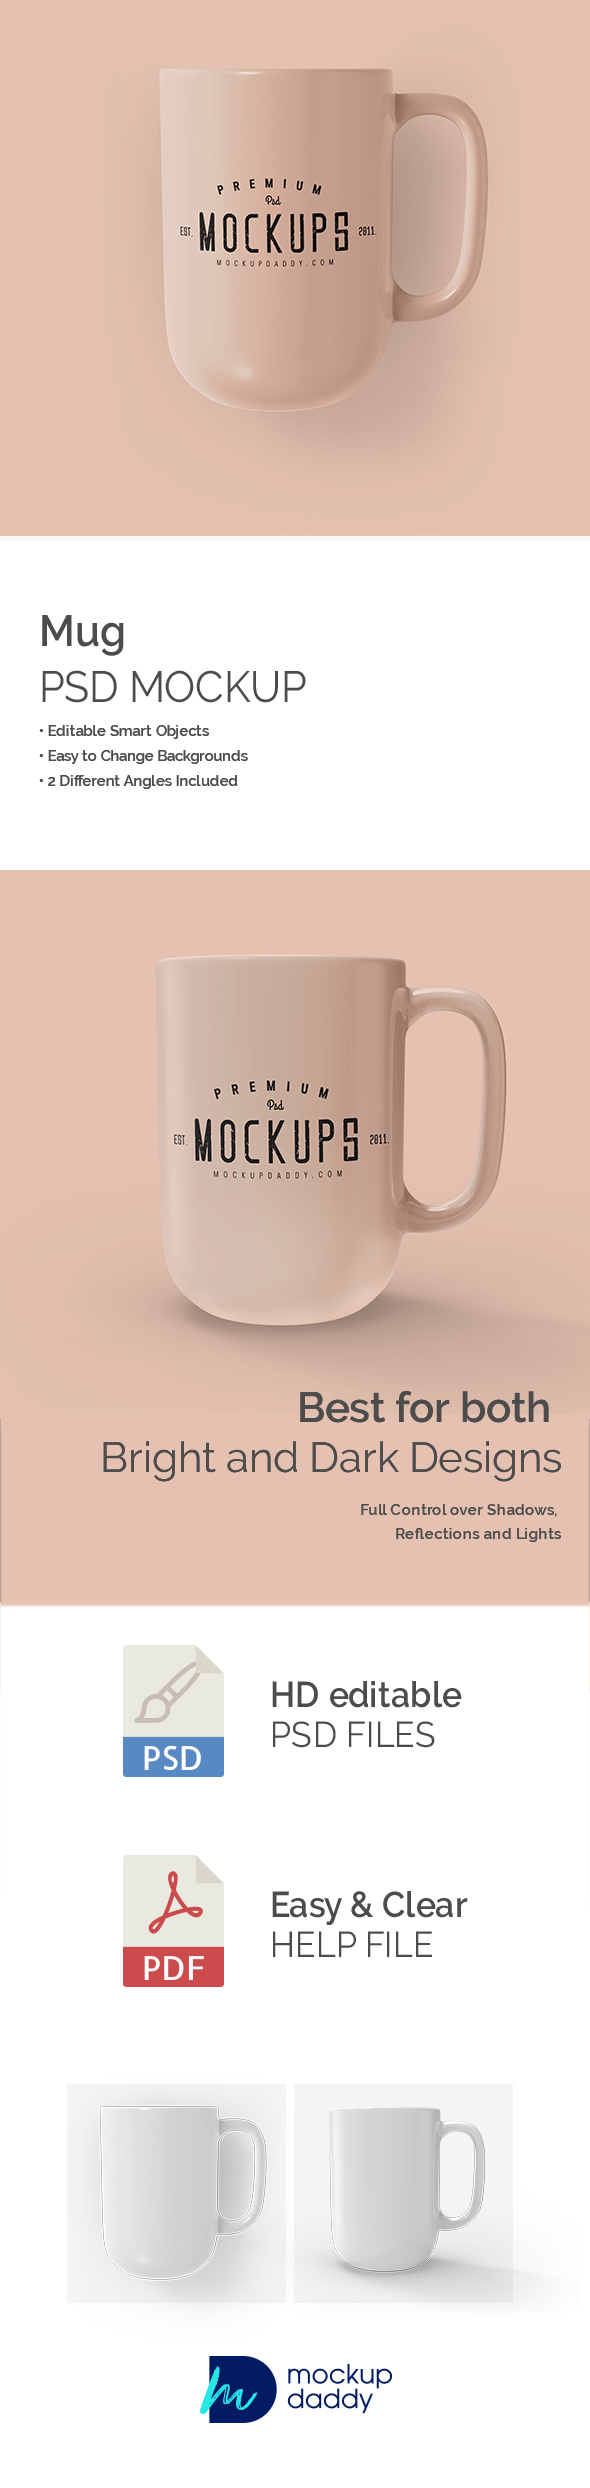 White ceramic mug mockup with a gold handle on a wooden table